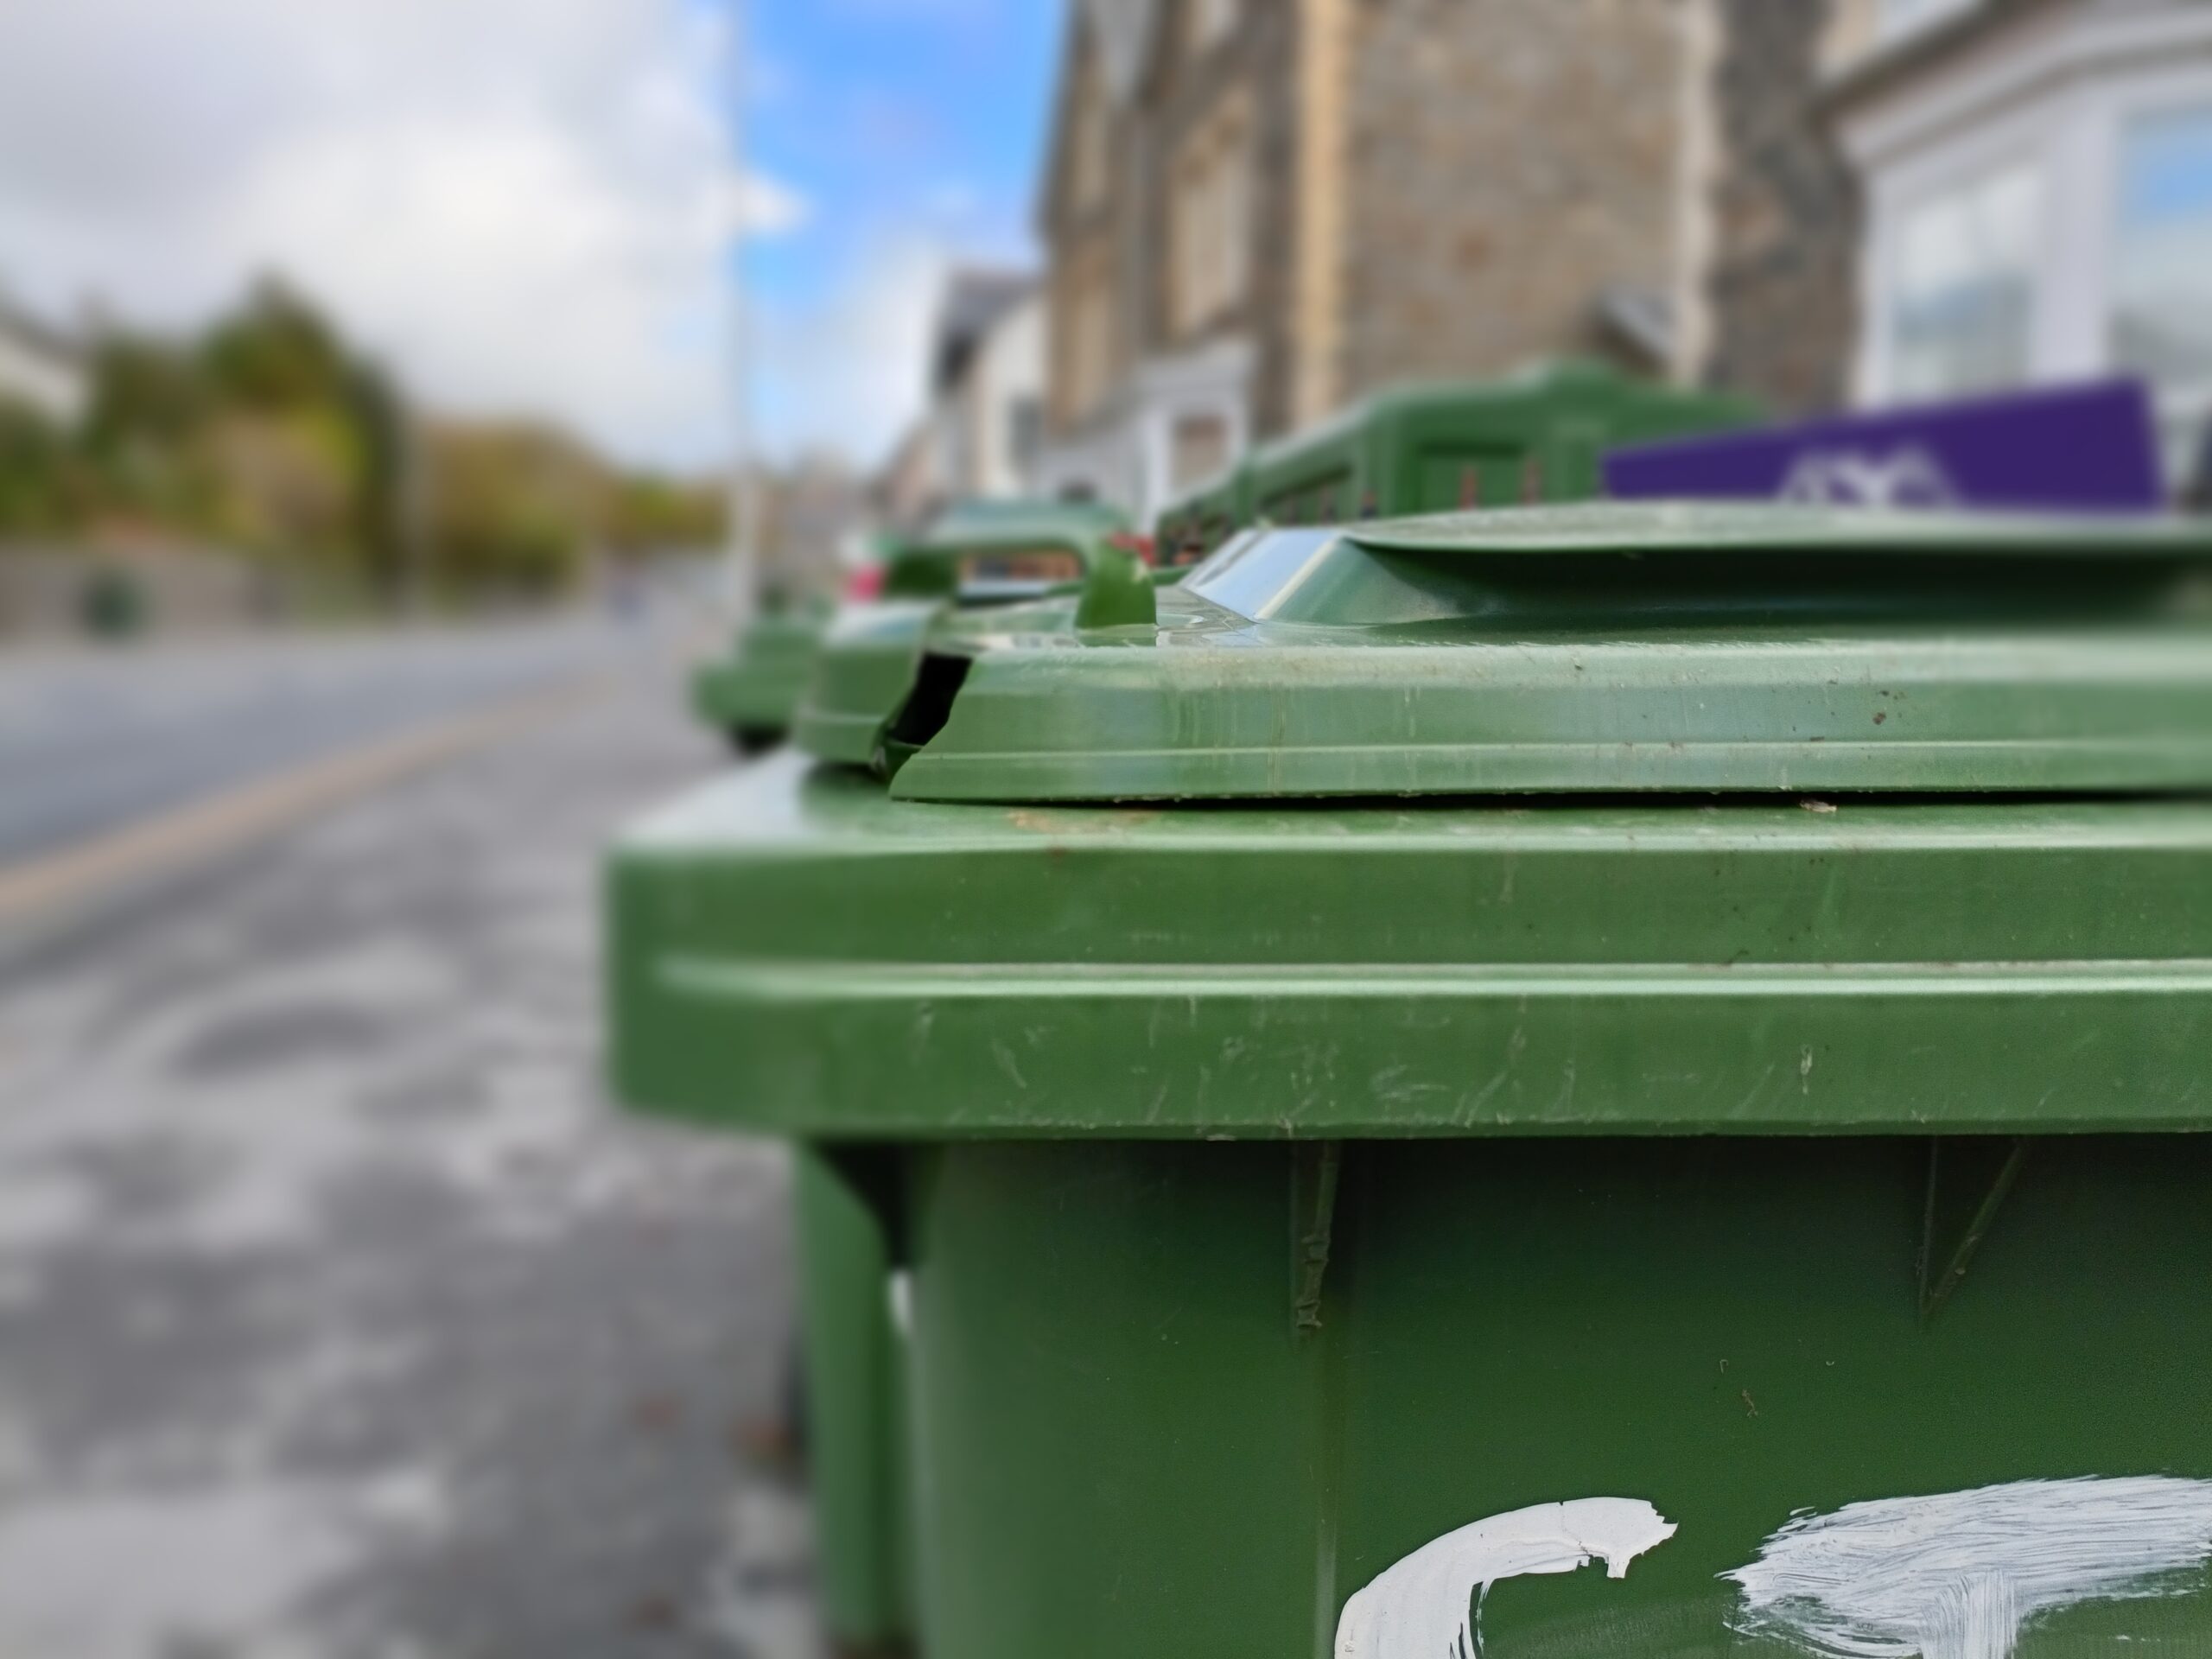 Swansea Council to phase out green bags in favour of reusable containers